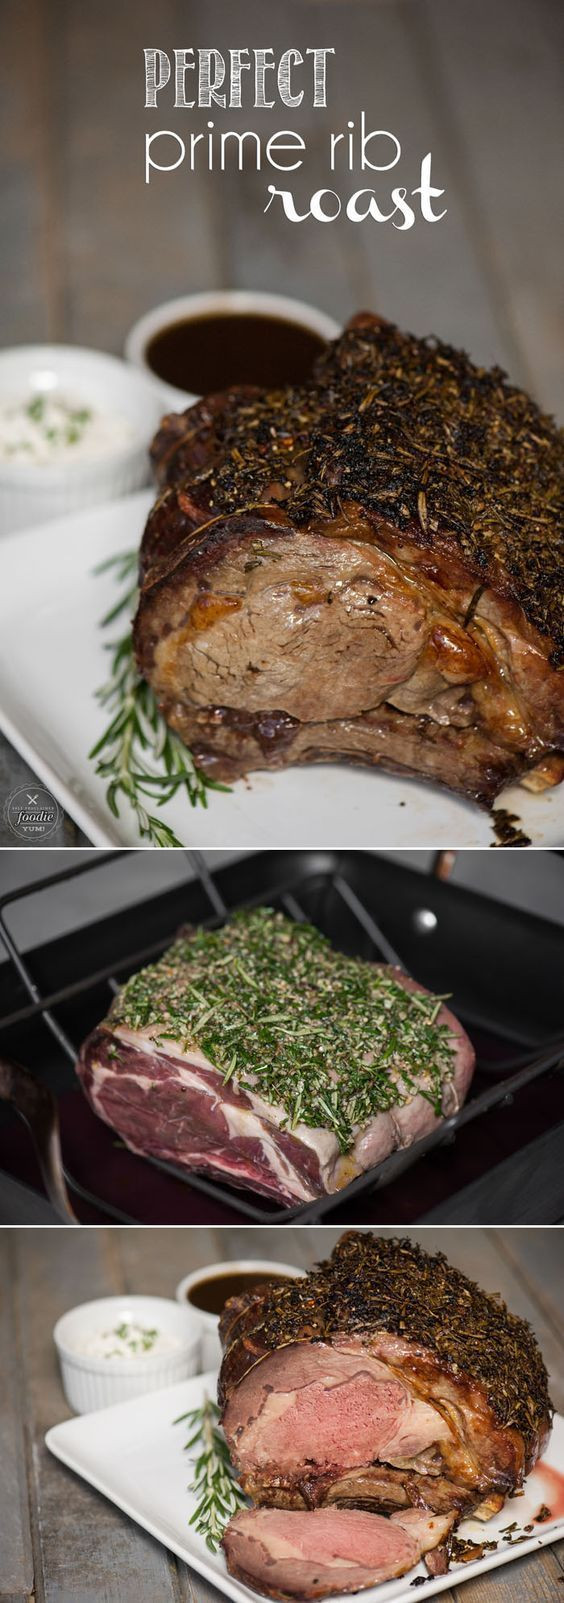 Side Dishes For Prime Rib Christmas
 17 Best ideas about Prime Rib Roast on Pinterest